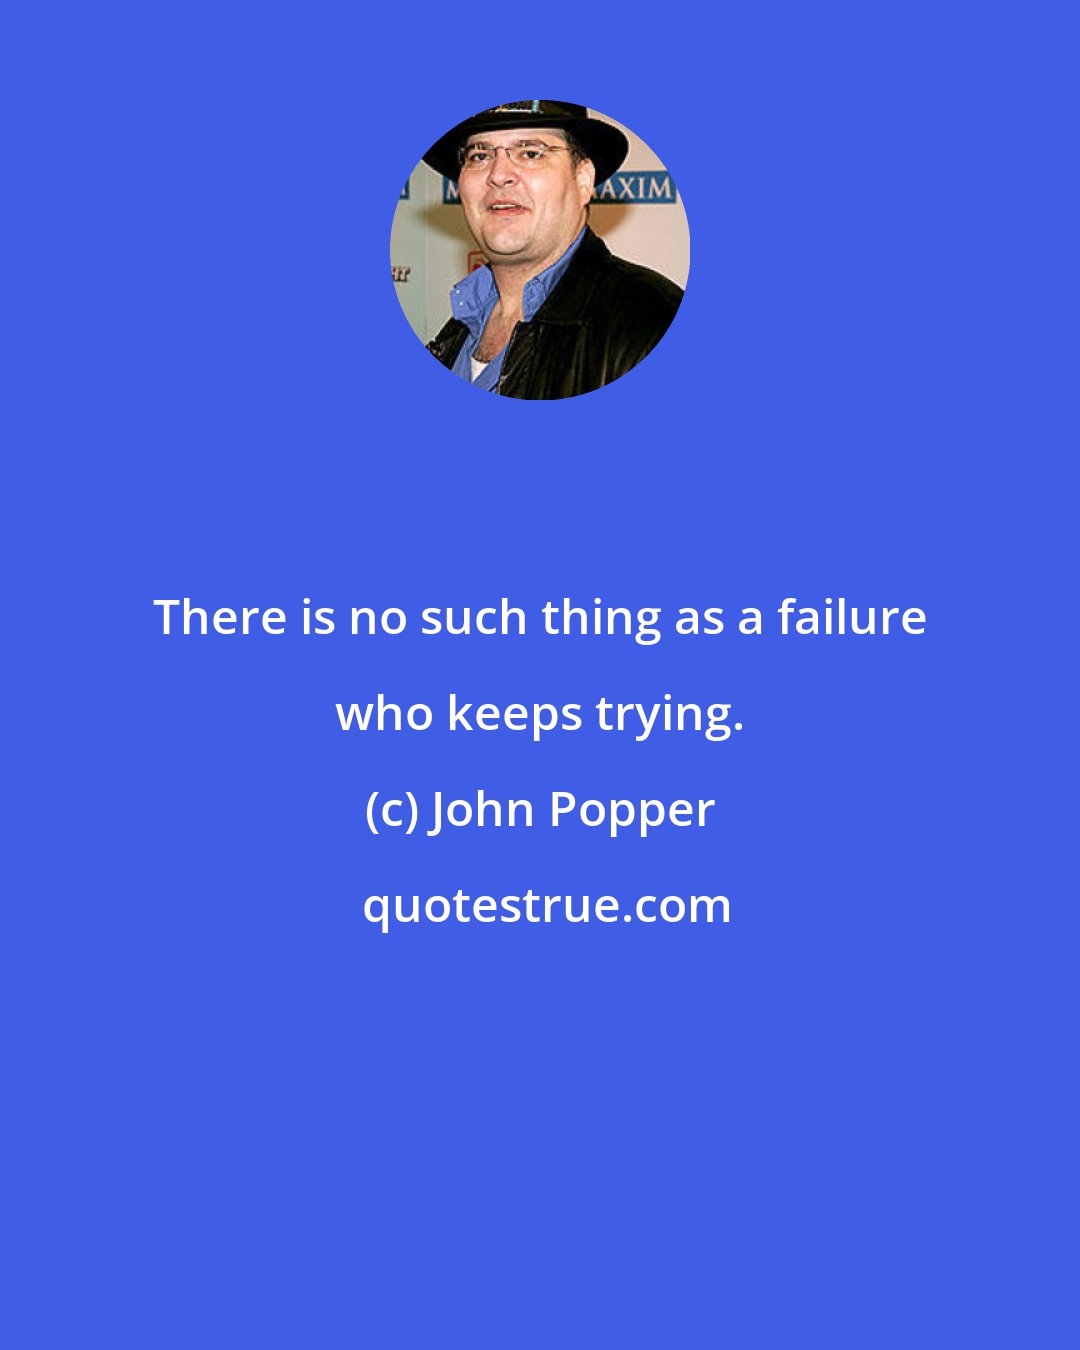 John Popper: There is no such thing as a failure who keeps trying.